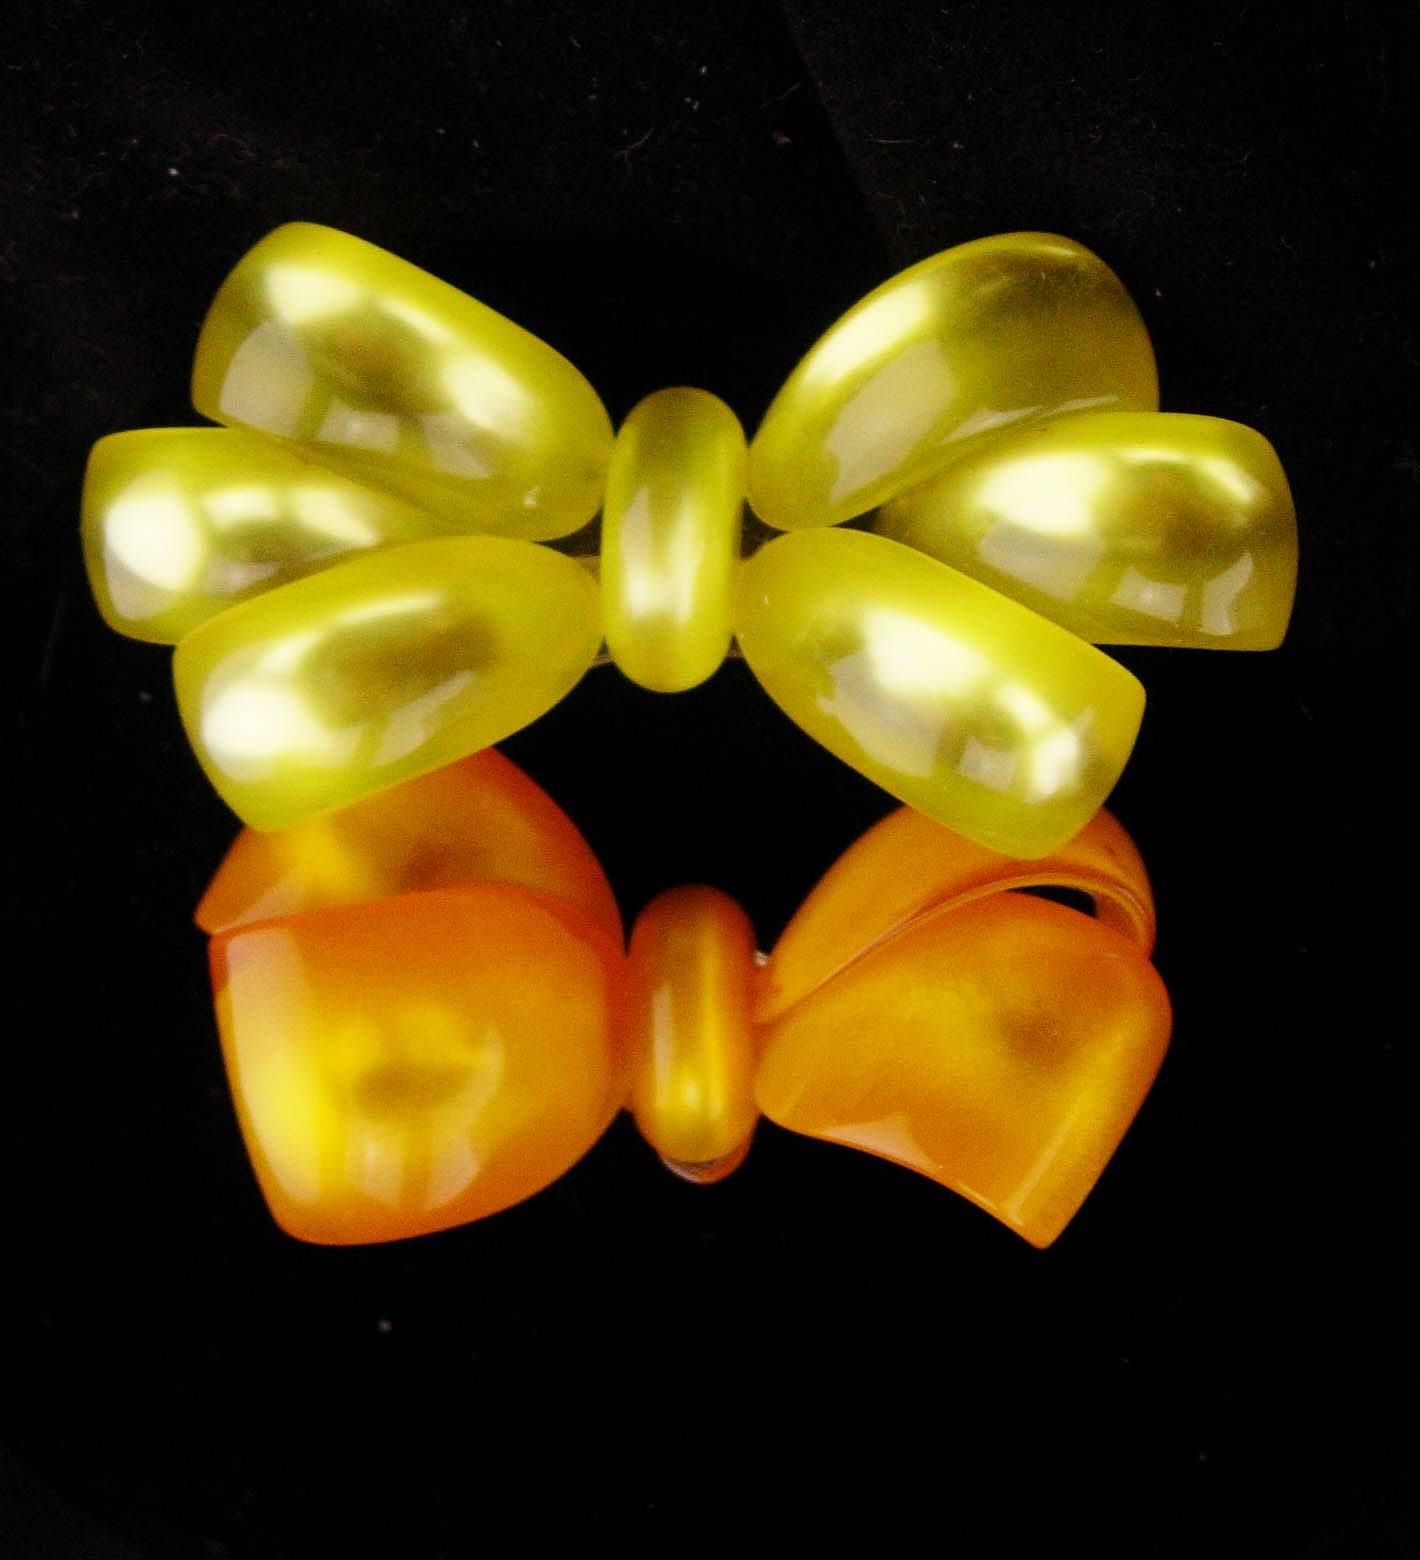 Primary image for 2 Large Lucite bow Brooch / Moonglow lucite / vintage brooch / gift for mom / ch